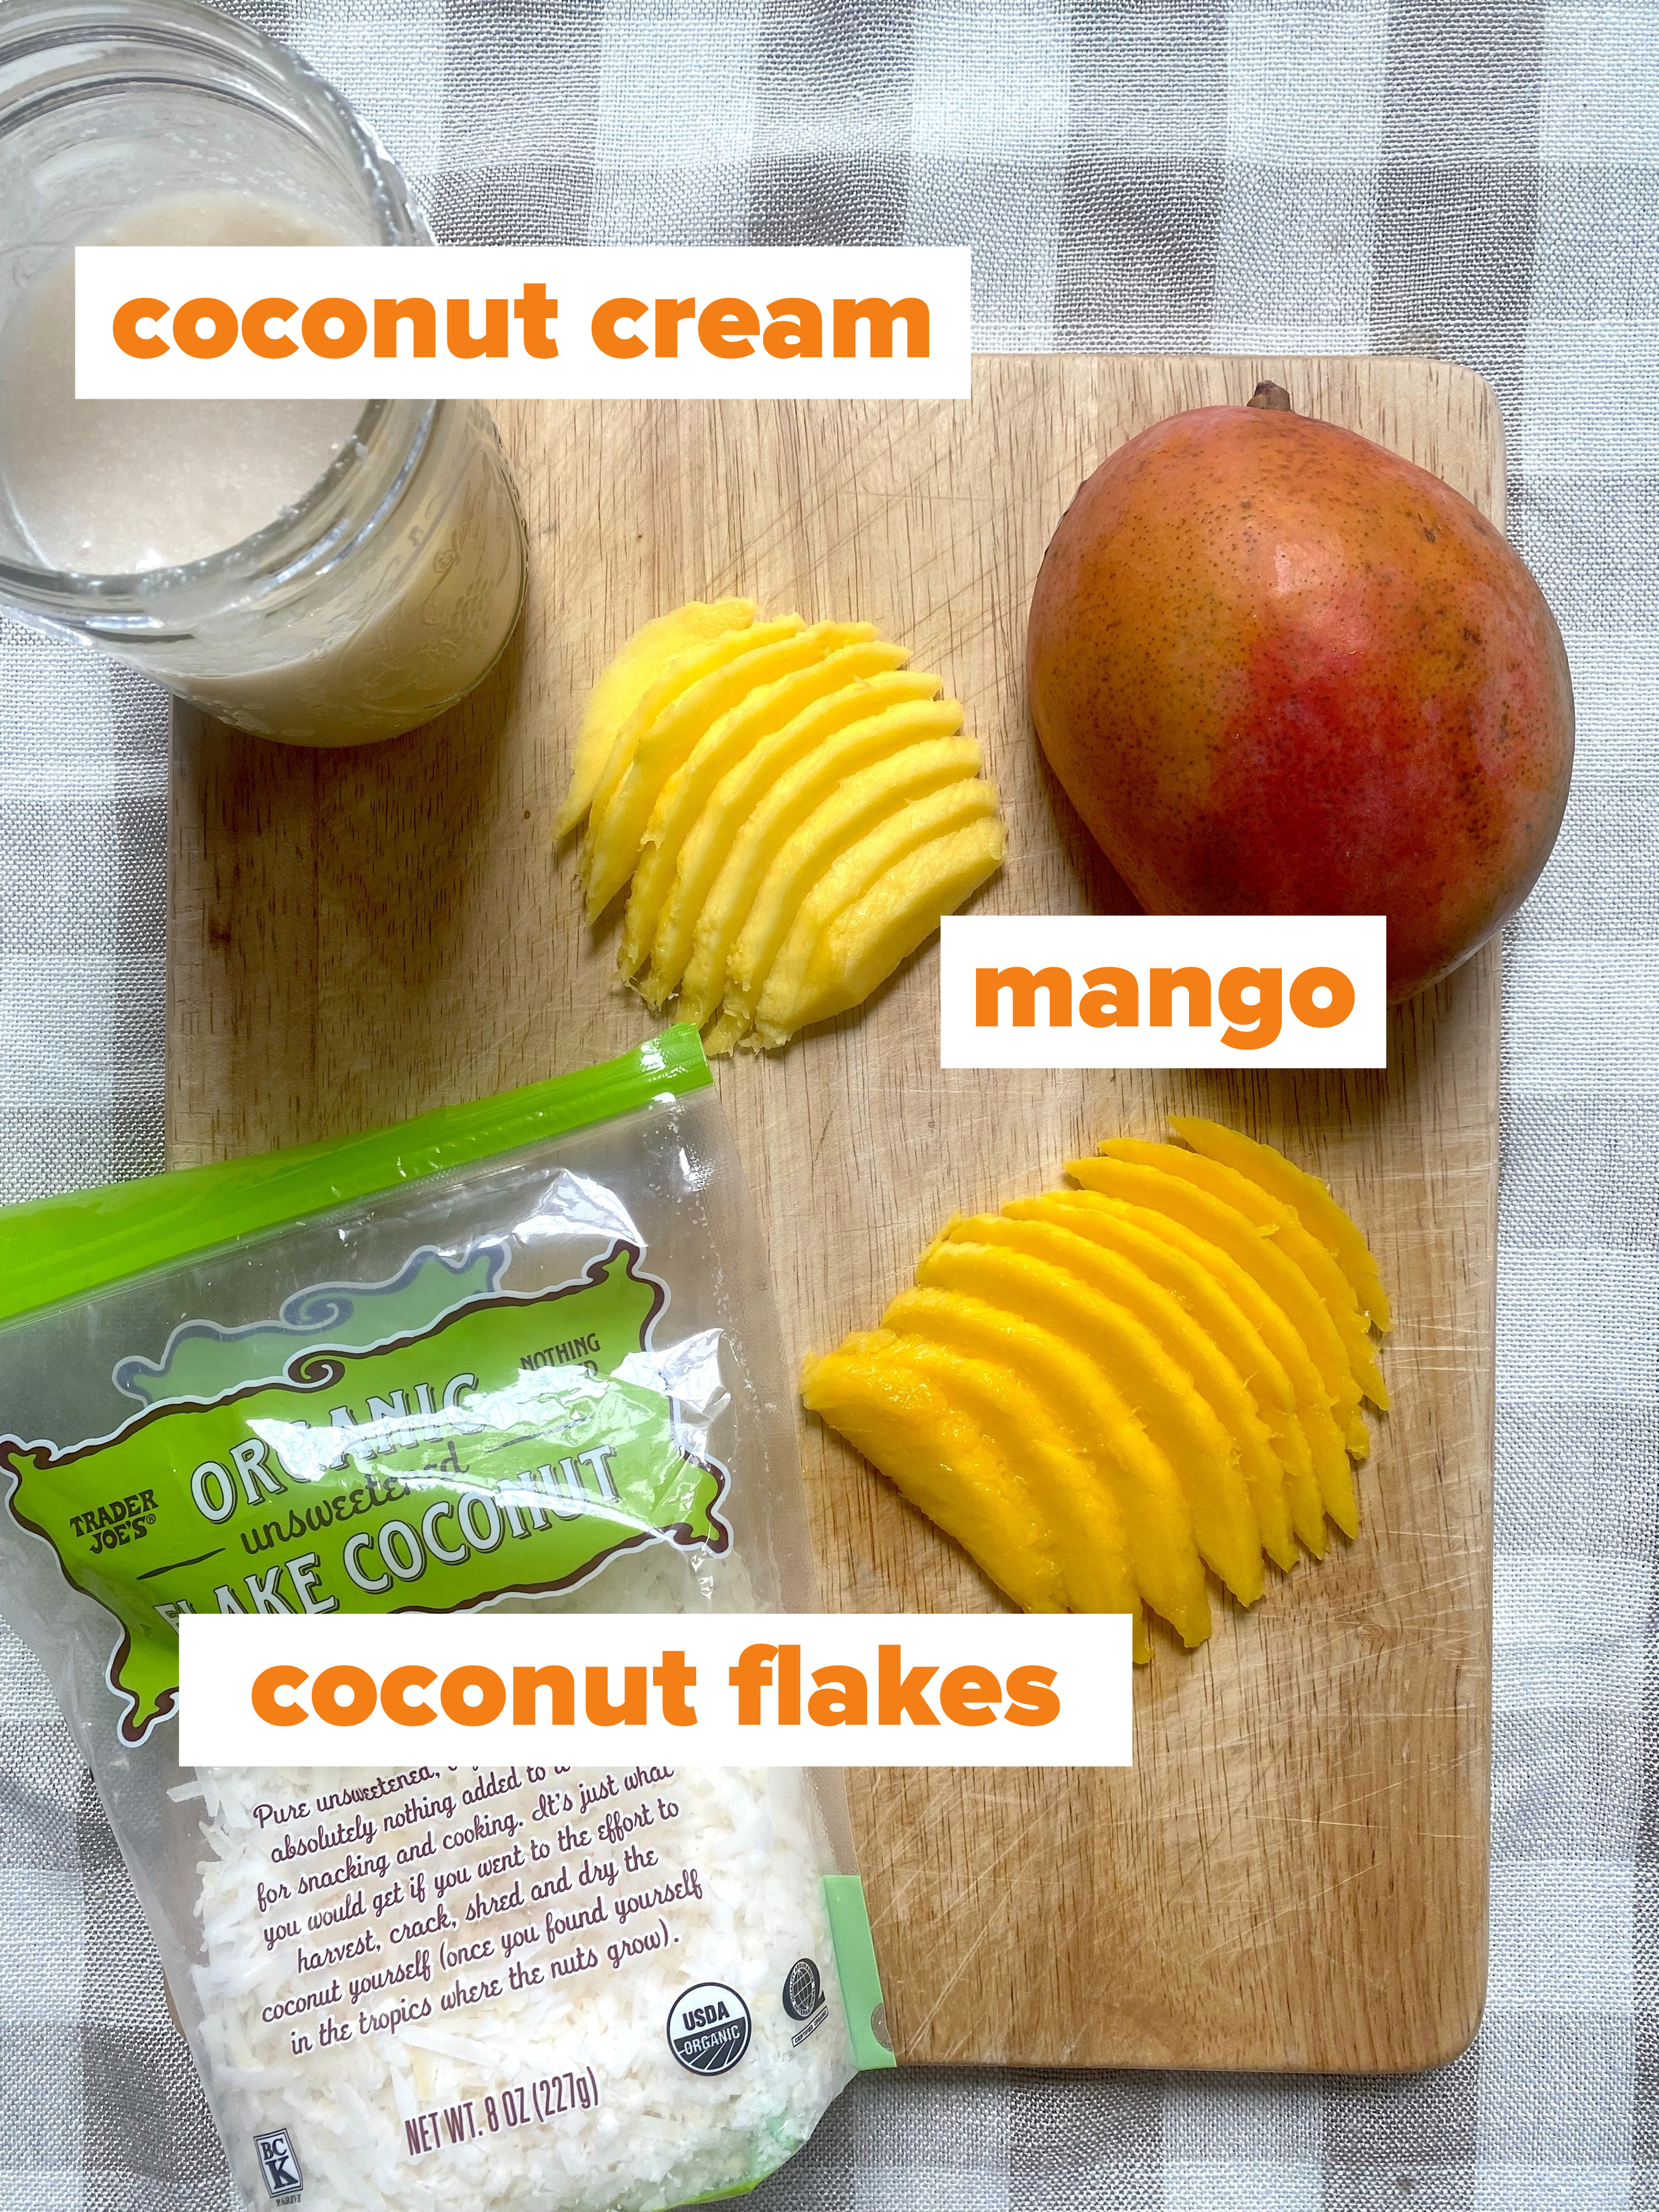 A cutting board with a jar of coconut cream, sliced mango, and a bag of coconut flakes